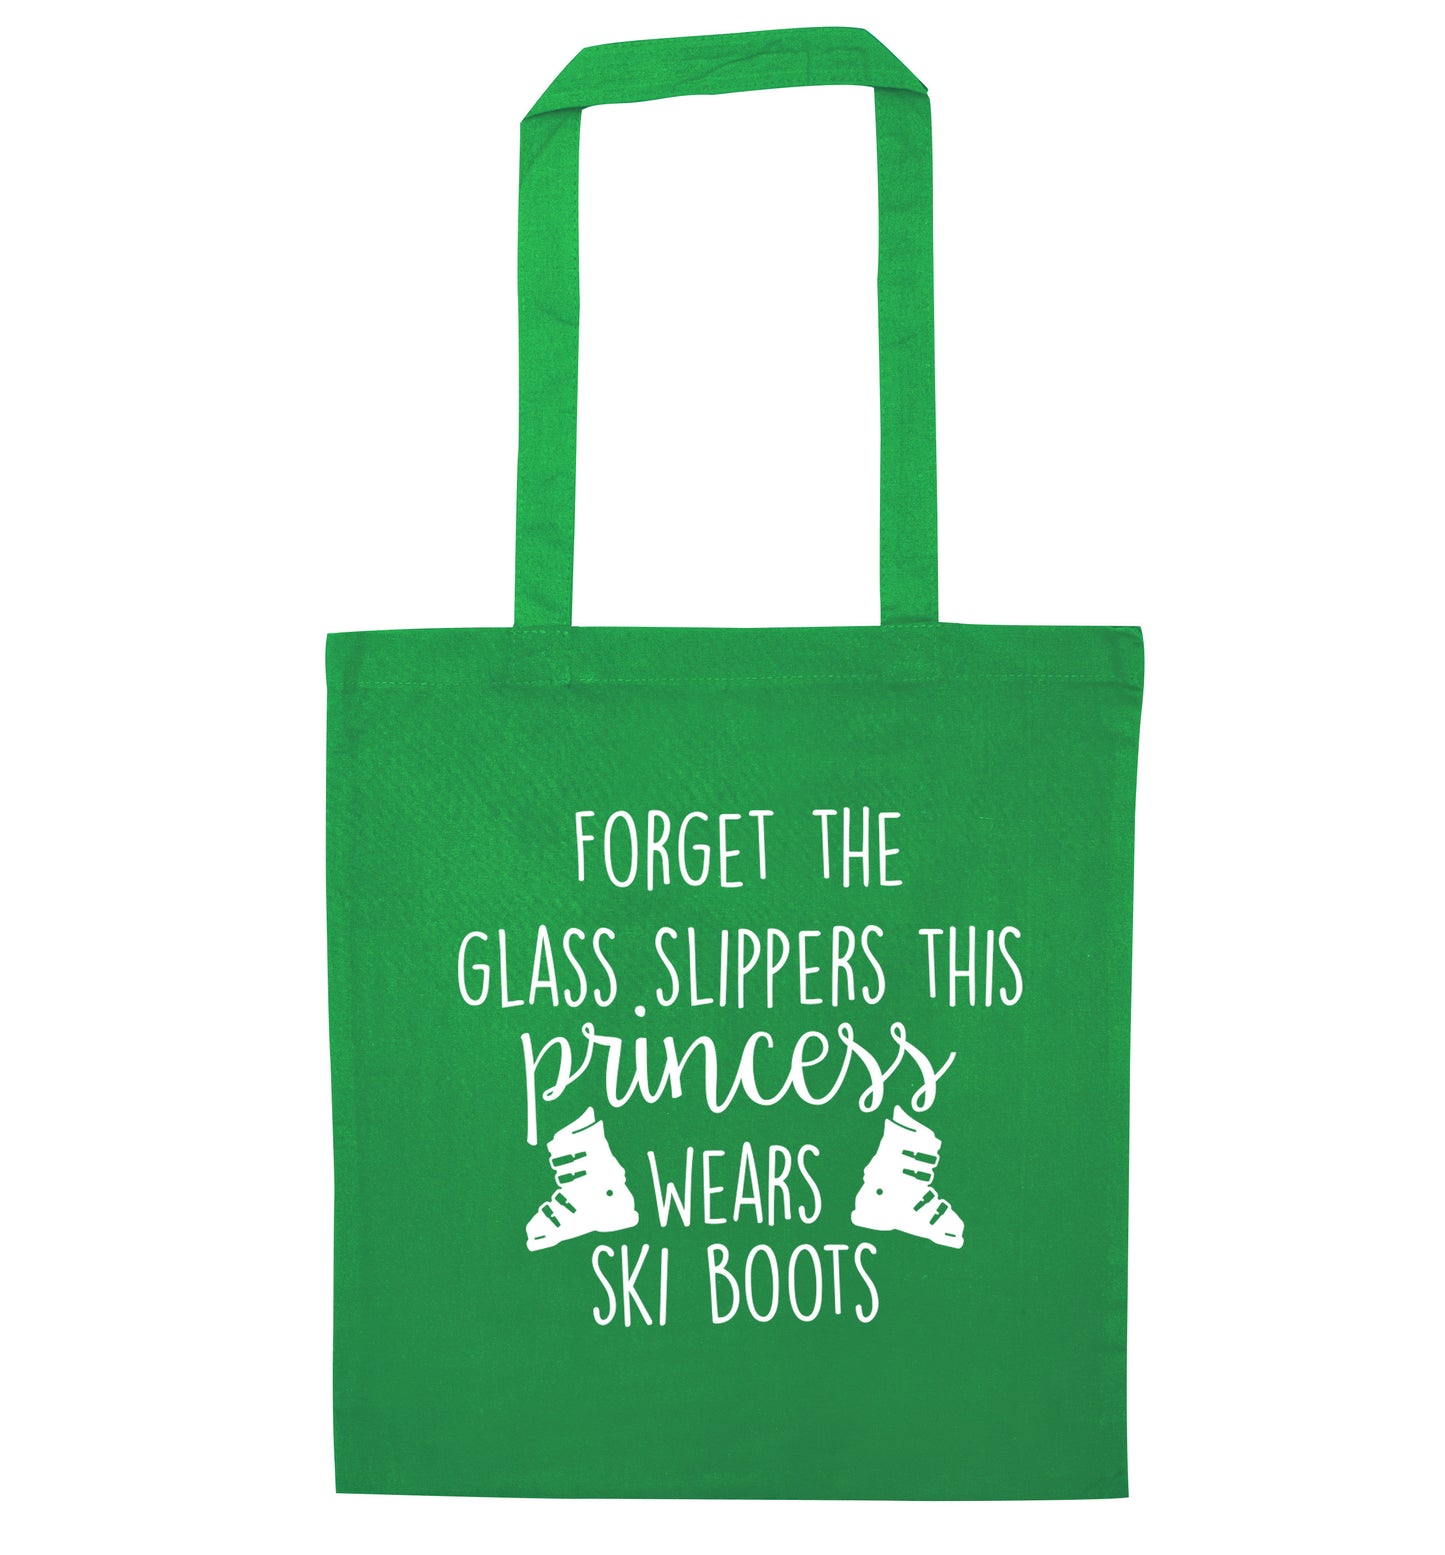 Forget the glass slippers this princess wears ski boots green tote bag